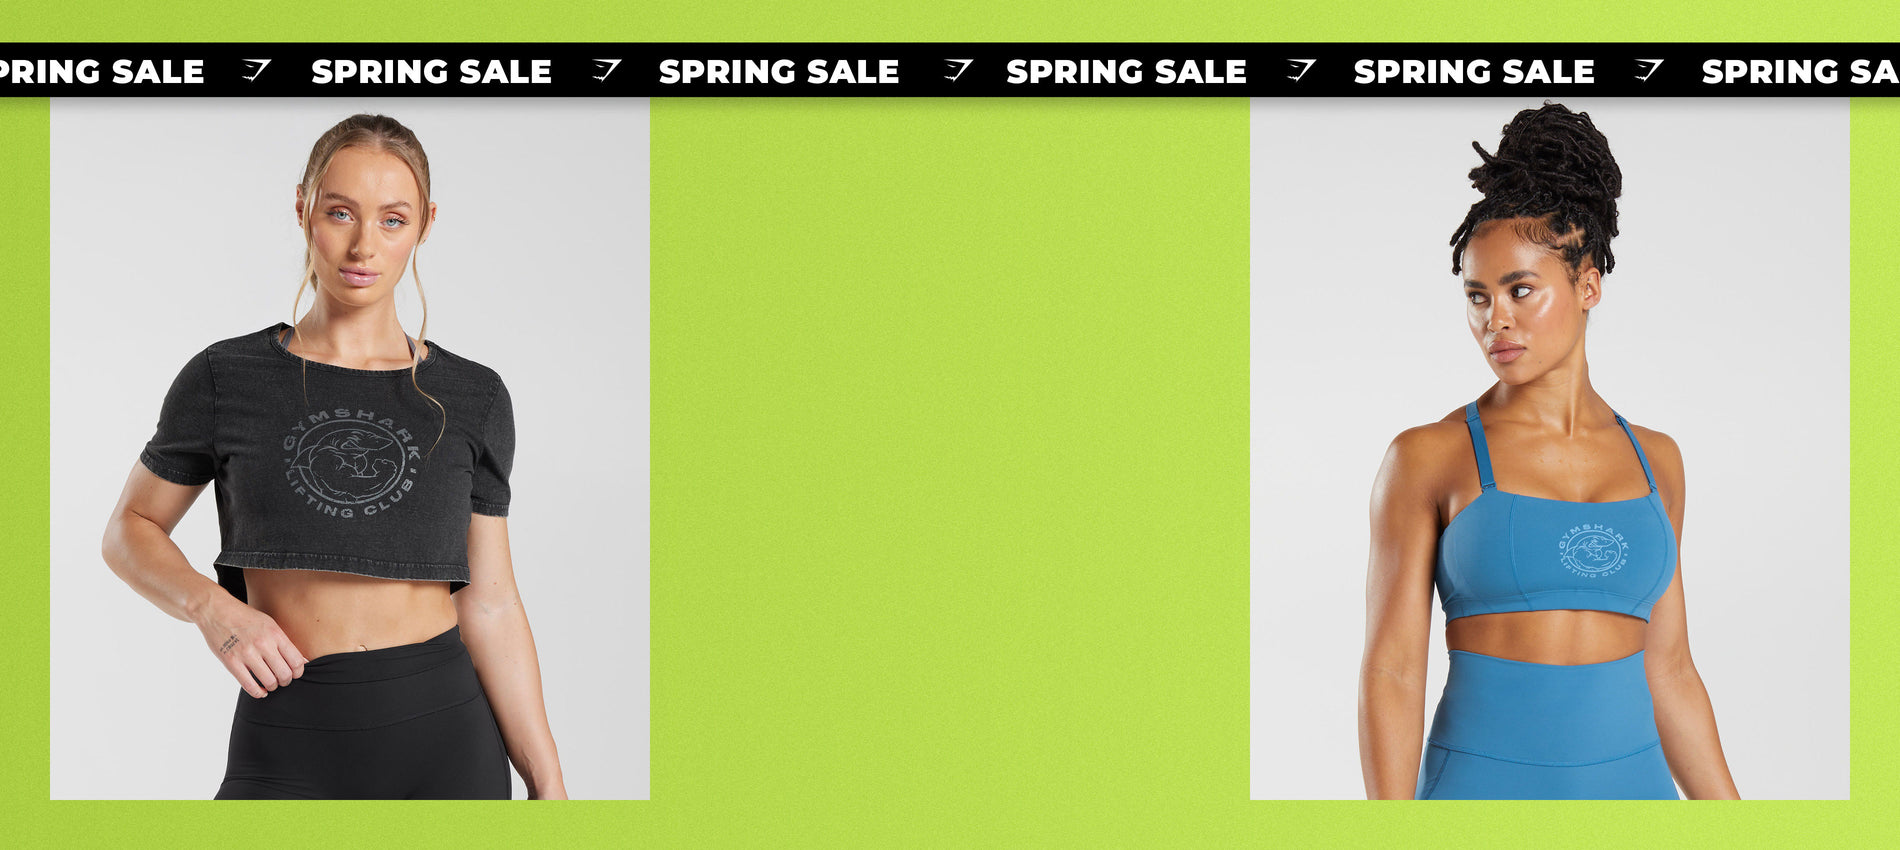 Sale Banners with a green background. 